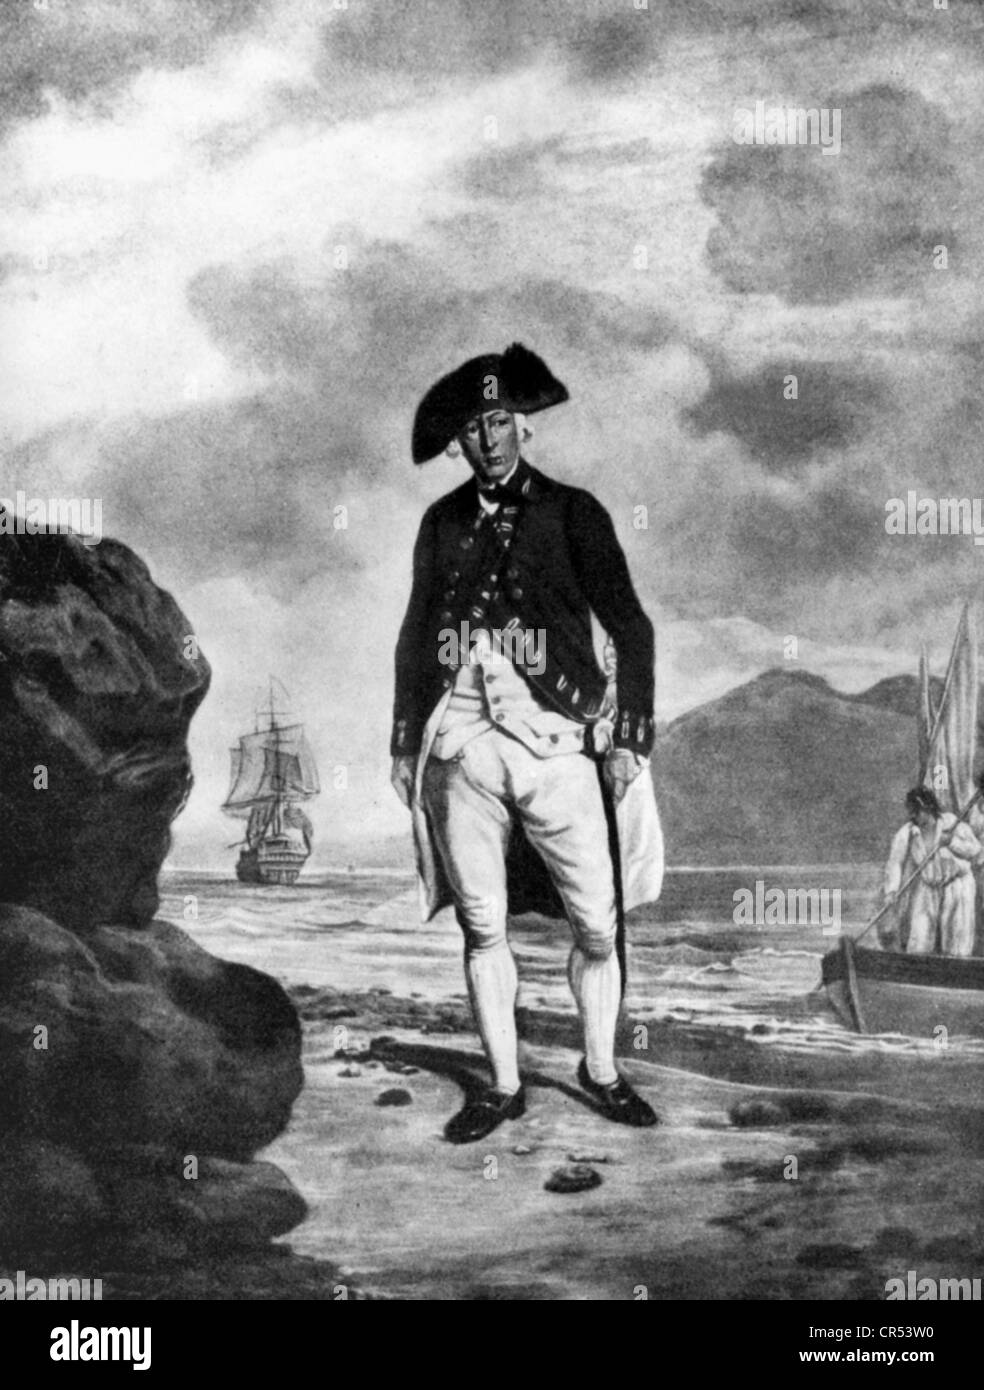 Philip, Arthur, 11.10.1738 - 31.8.1814, British naval officer, 1th Gouverneur of New South Wales 26.1.1788 - 10.12.1792, full length, landfall at Botany Bay 18.1.1788, based on painting, 1788, Stock Photo